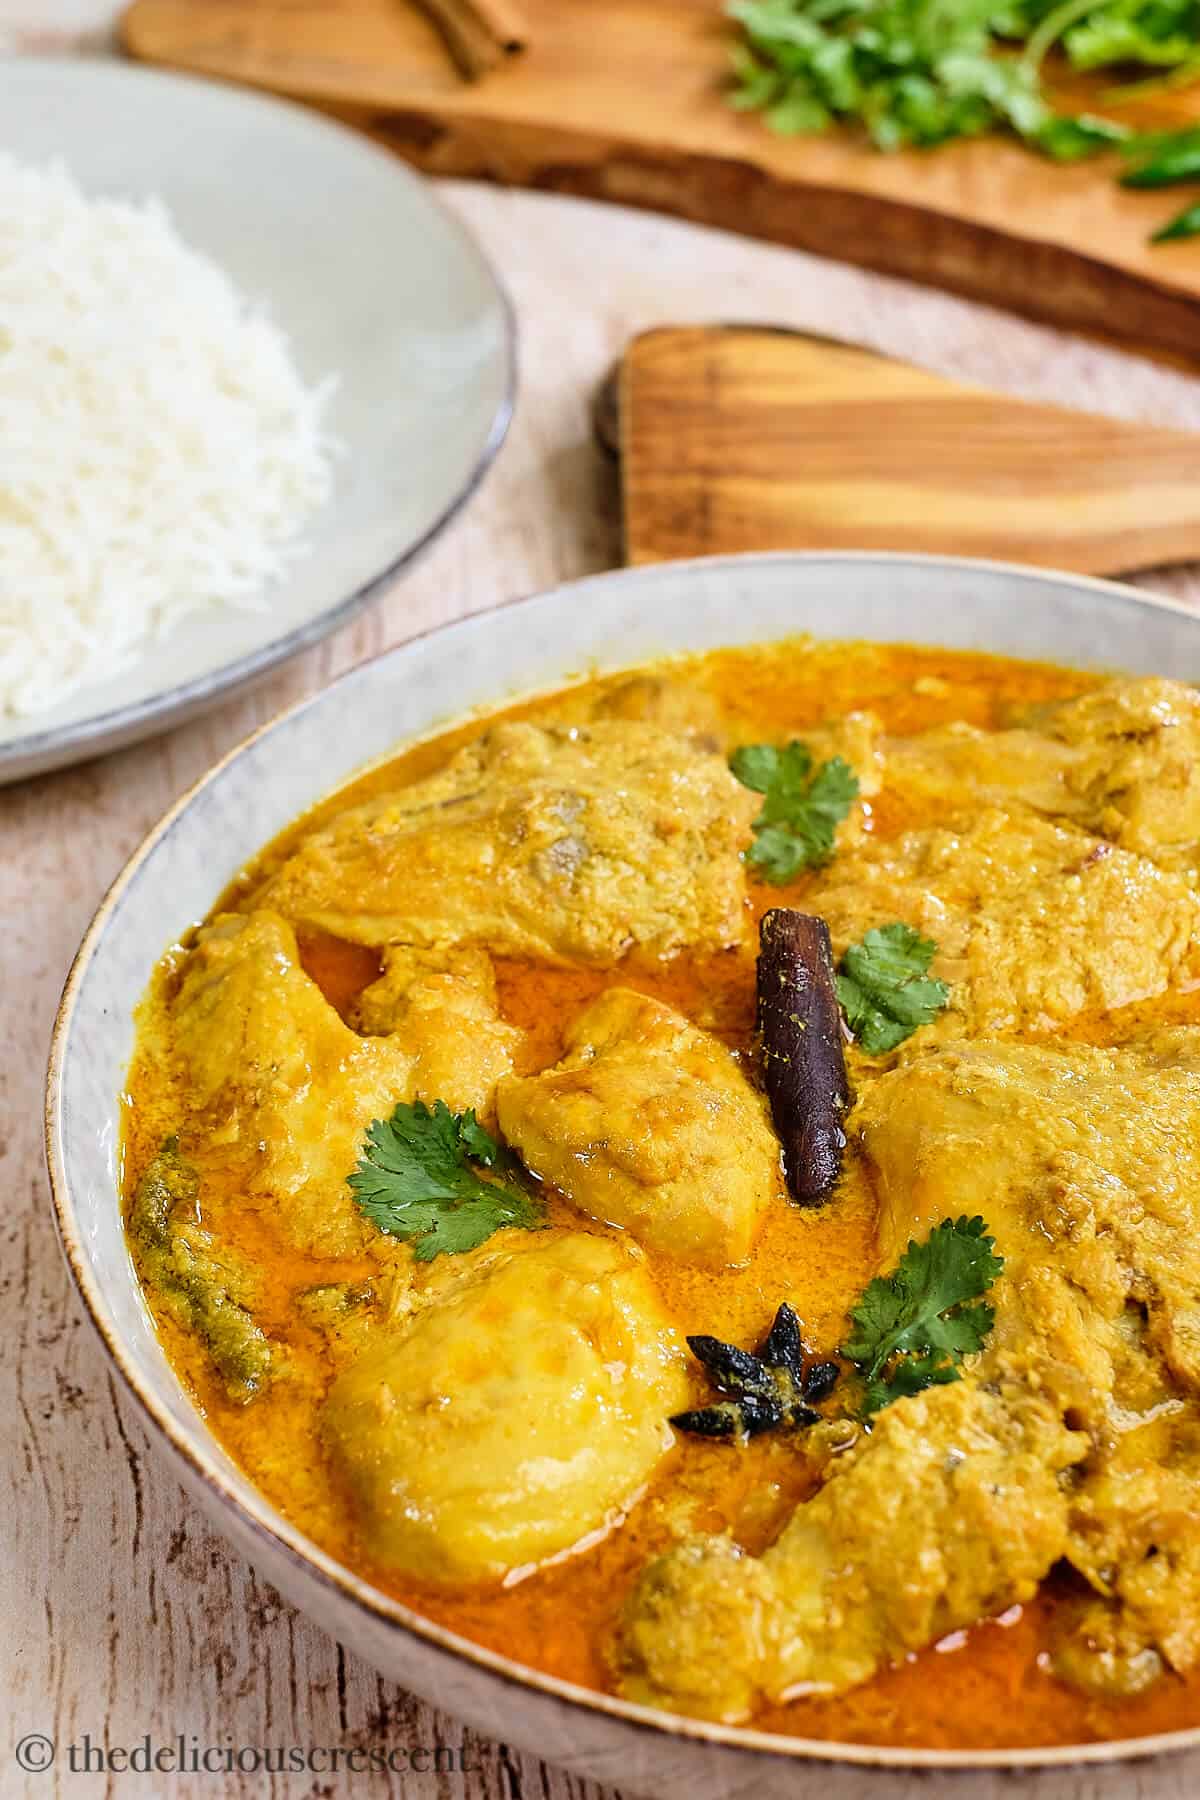 Chicken curry with coconut sauce served in a grey bowl.